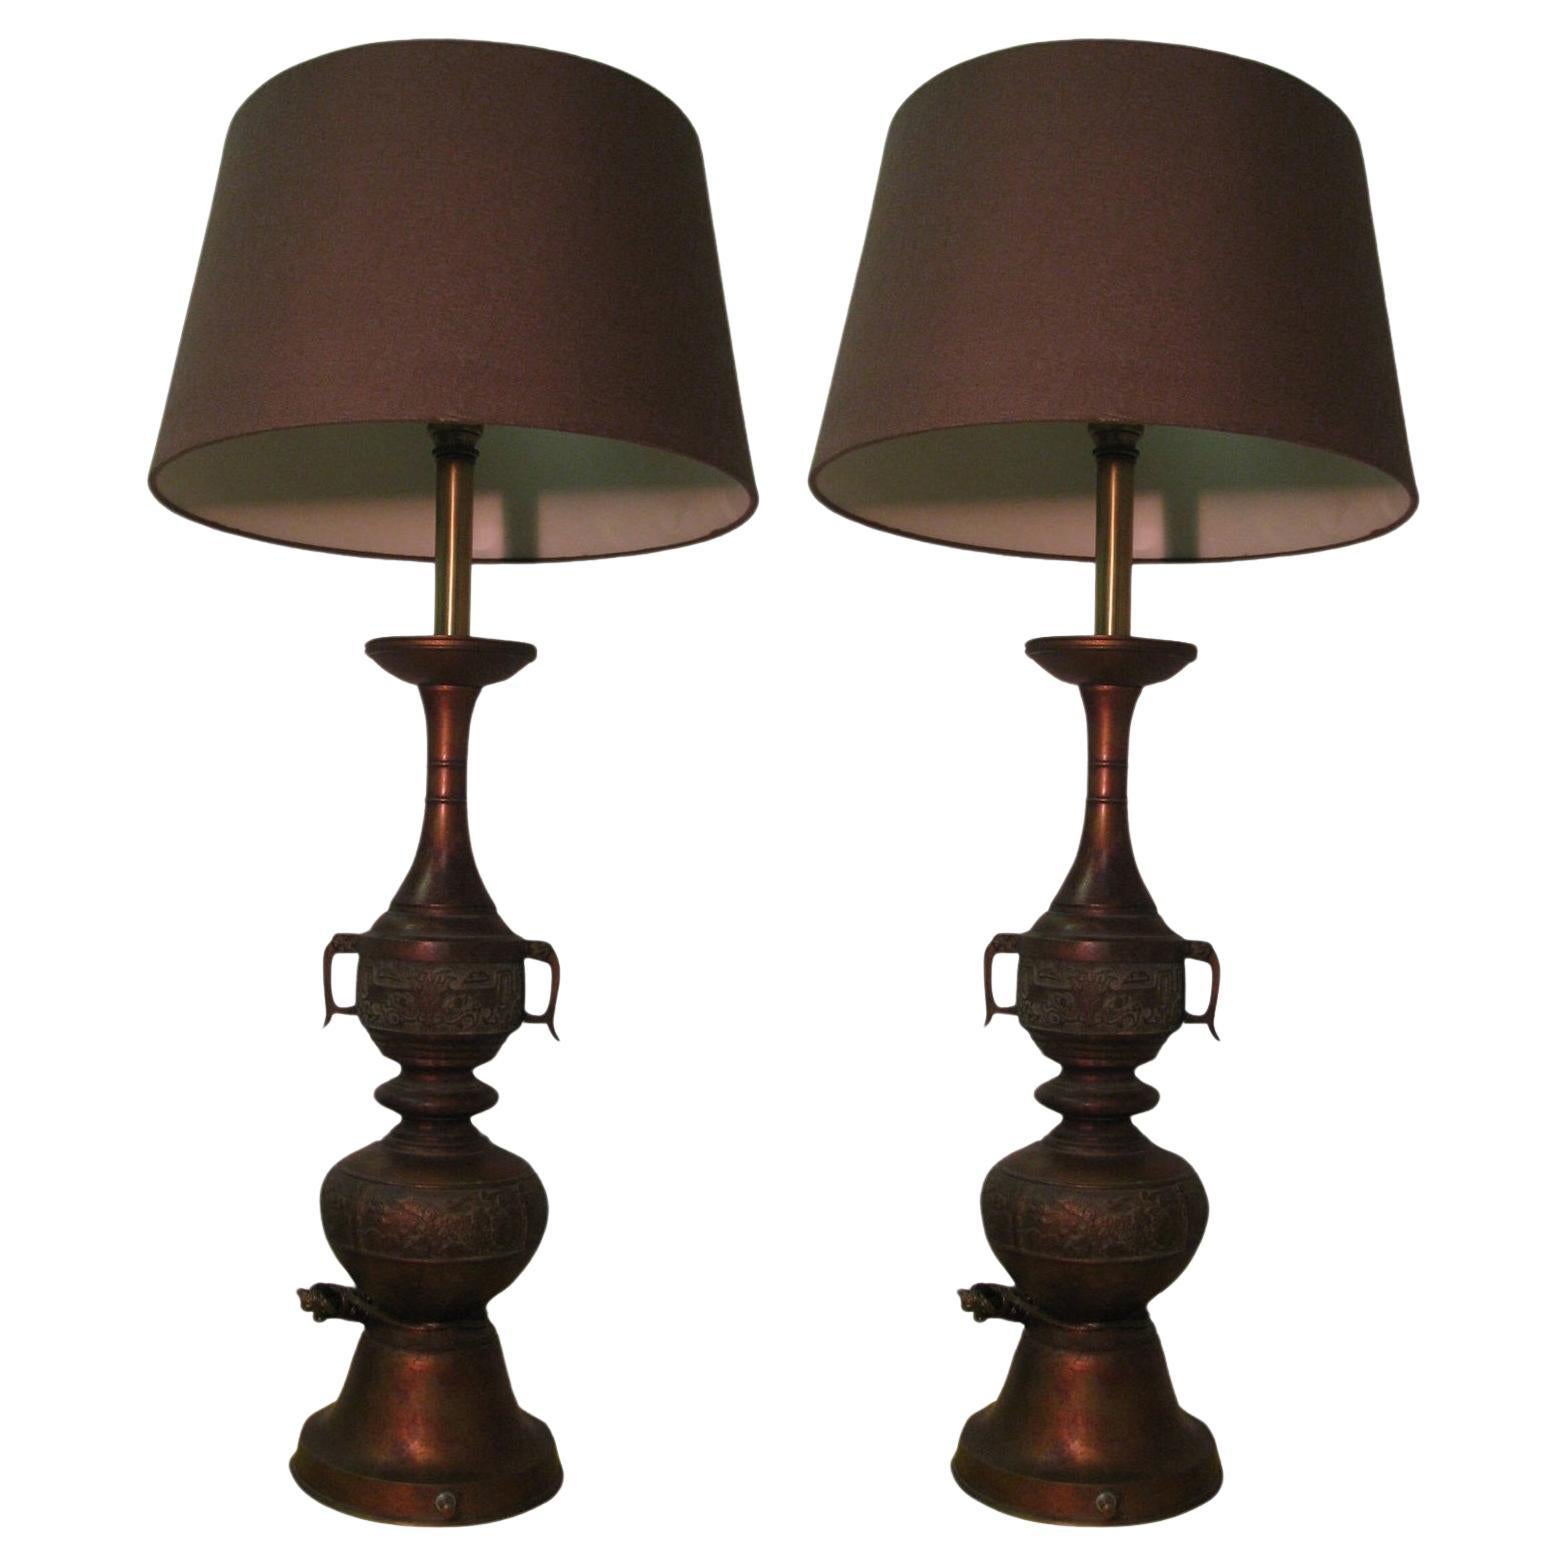 Pair of Mid Century Tall Japanese Bronze Patinated Table Lamps